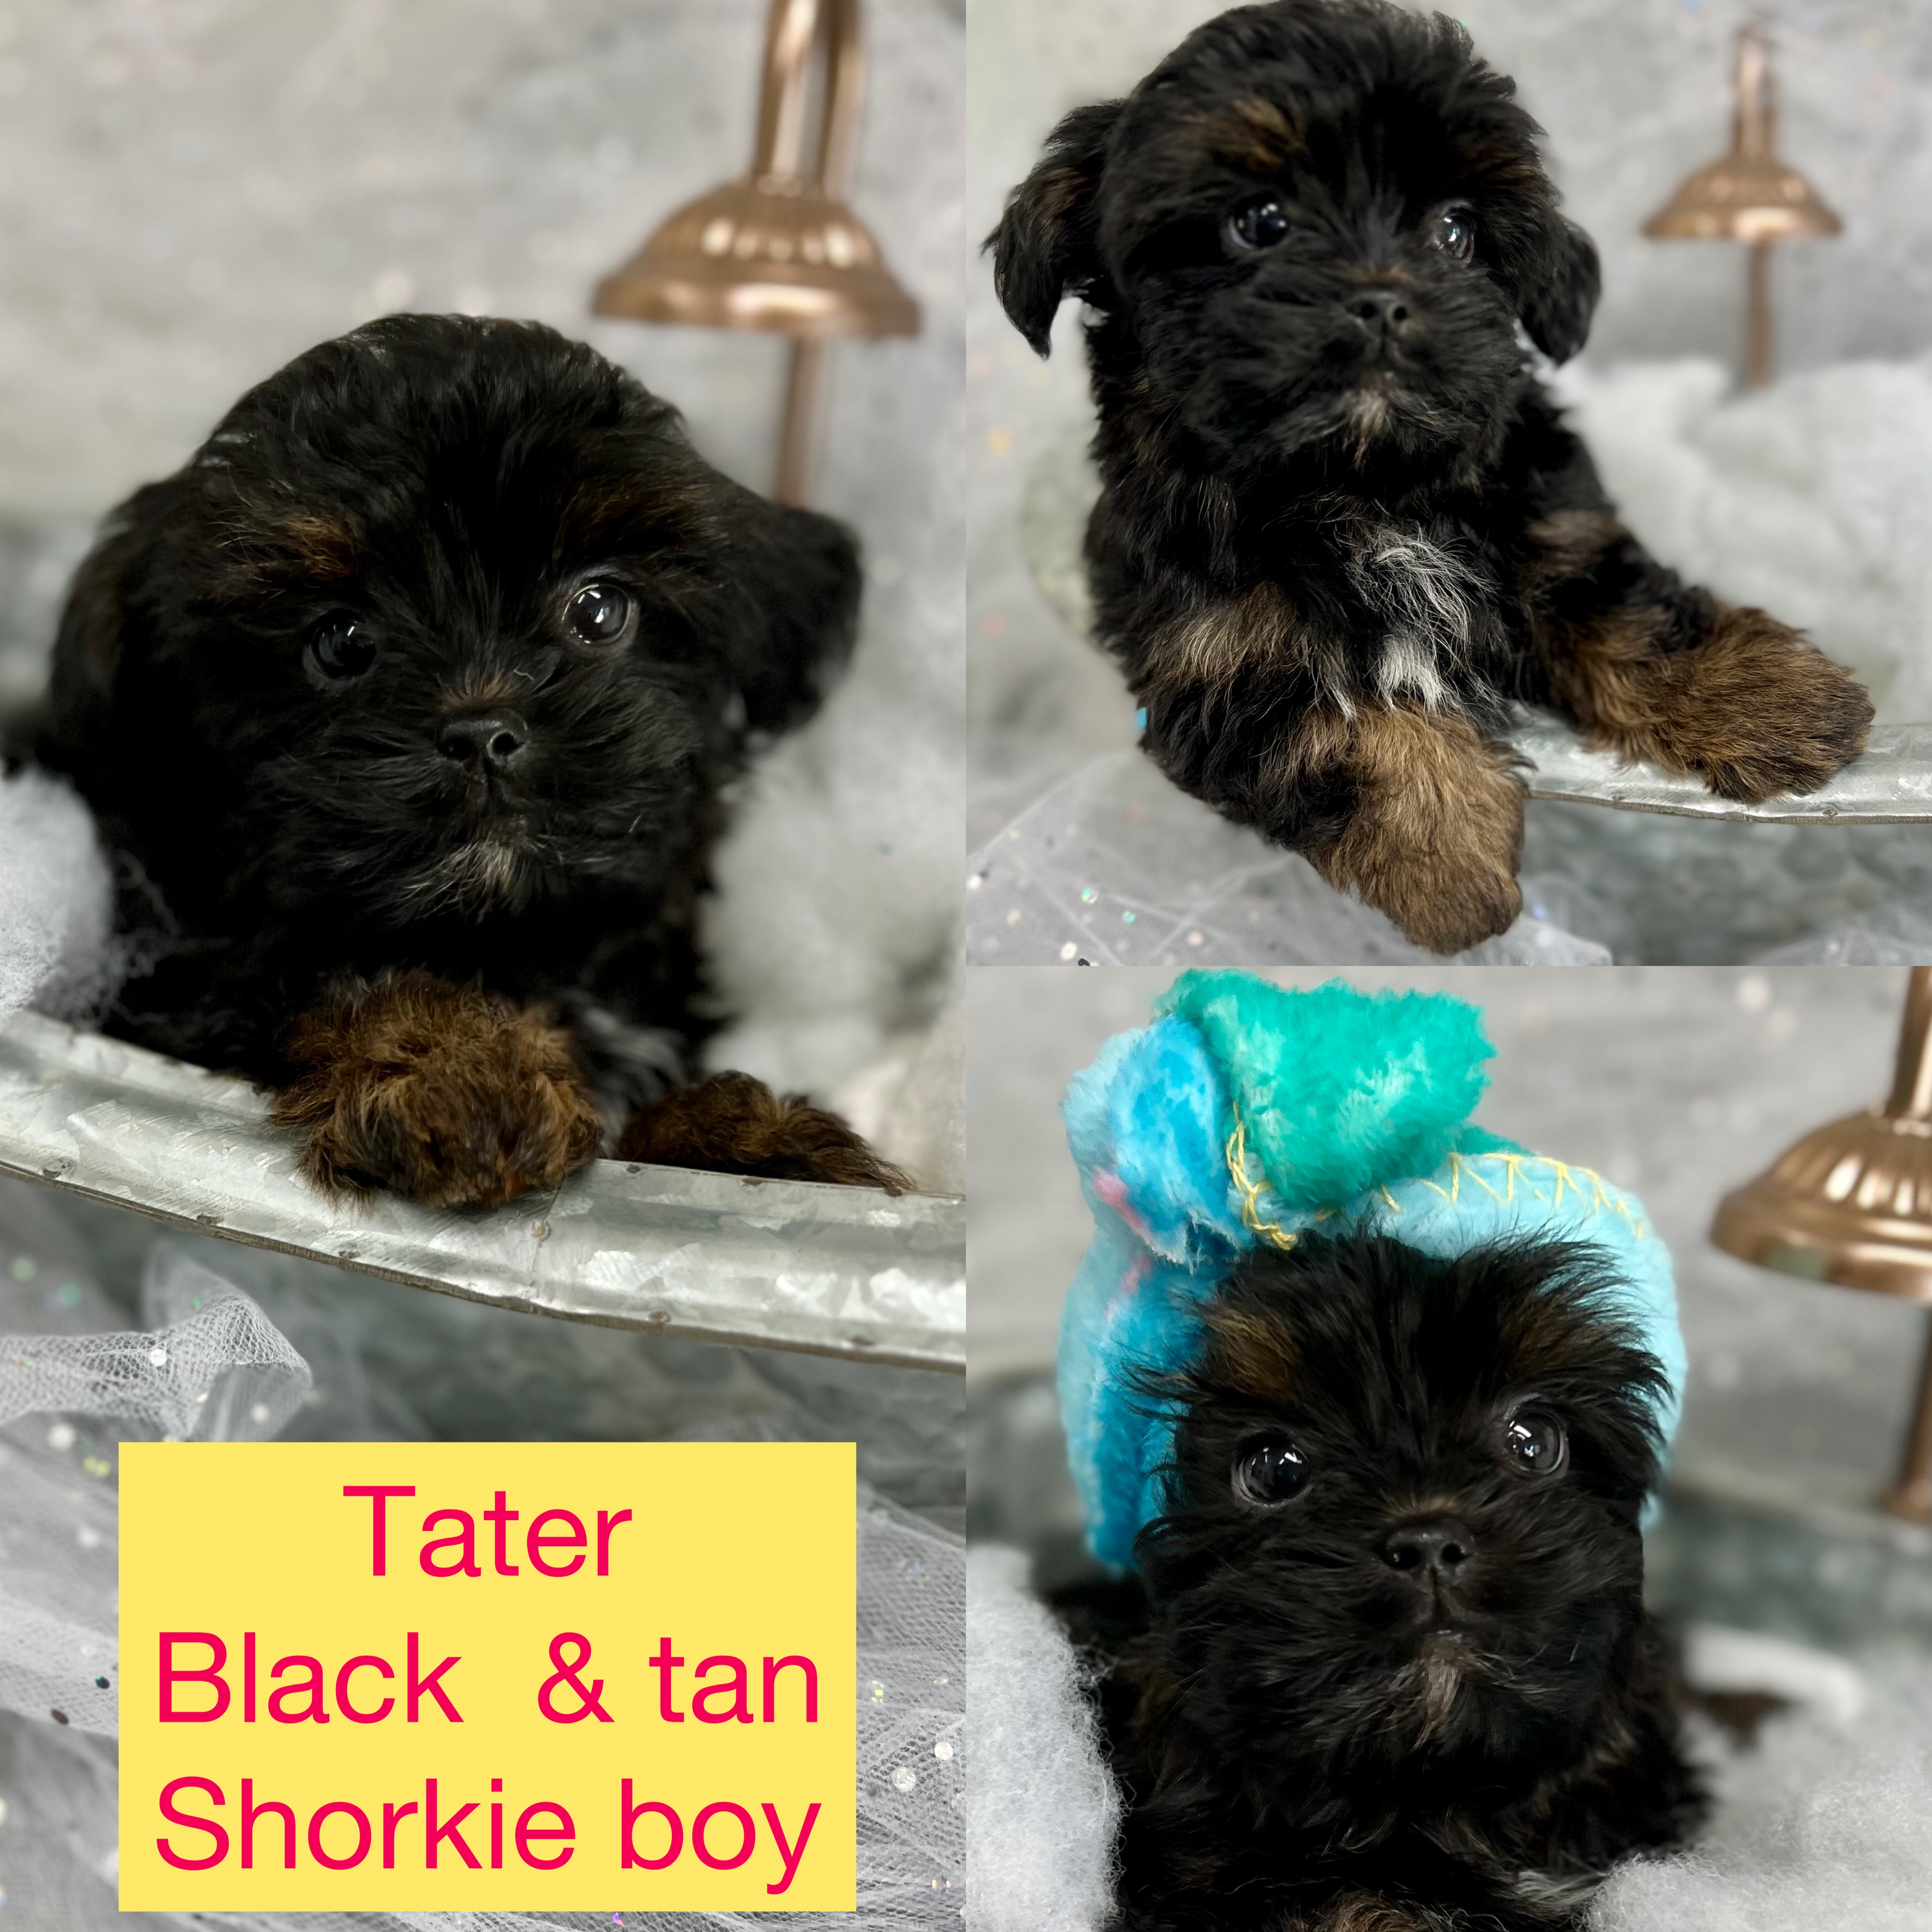 Tater AVAILABLE Shorkie boy click pic for info